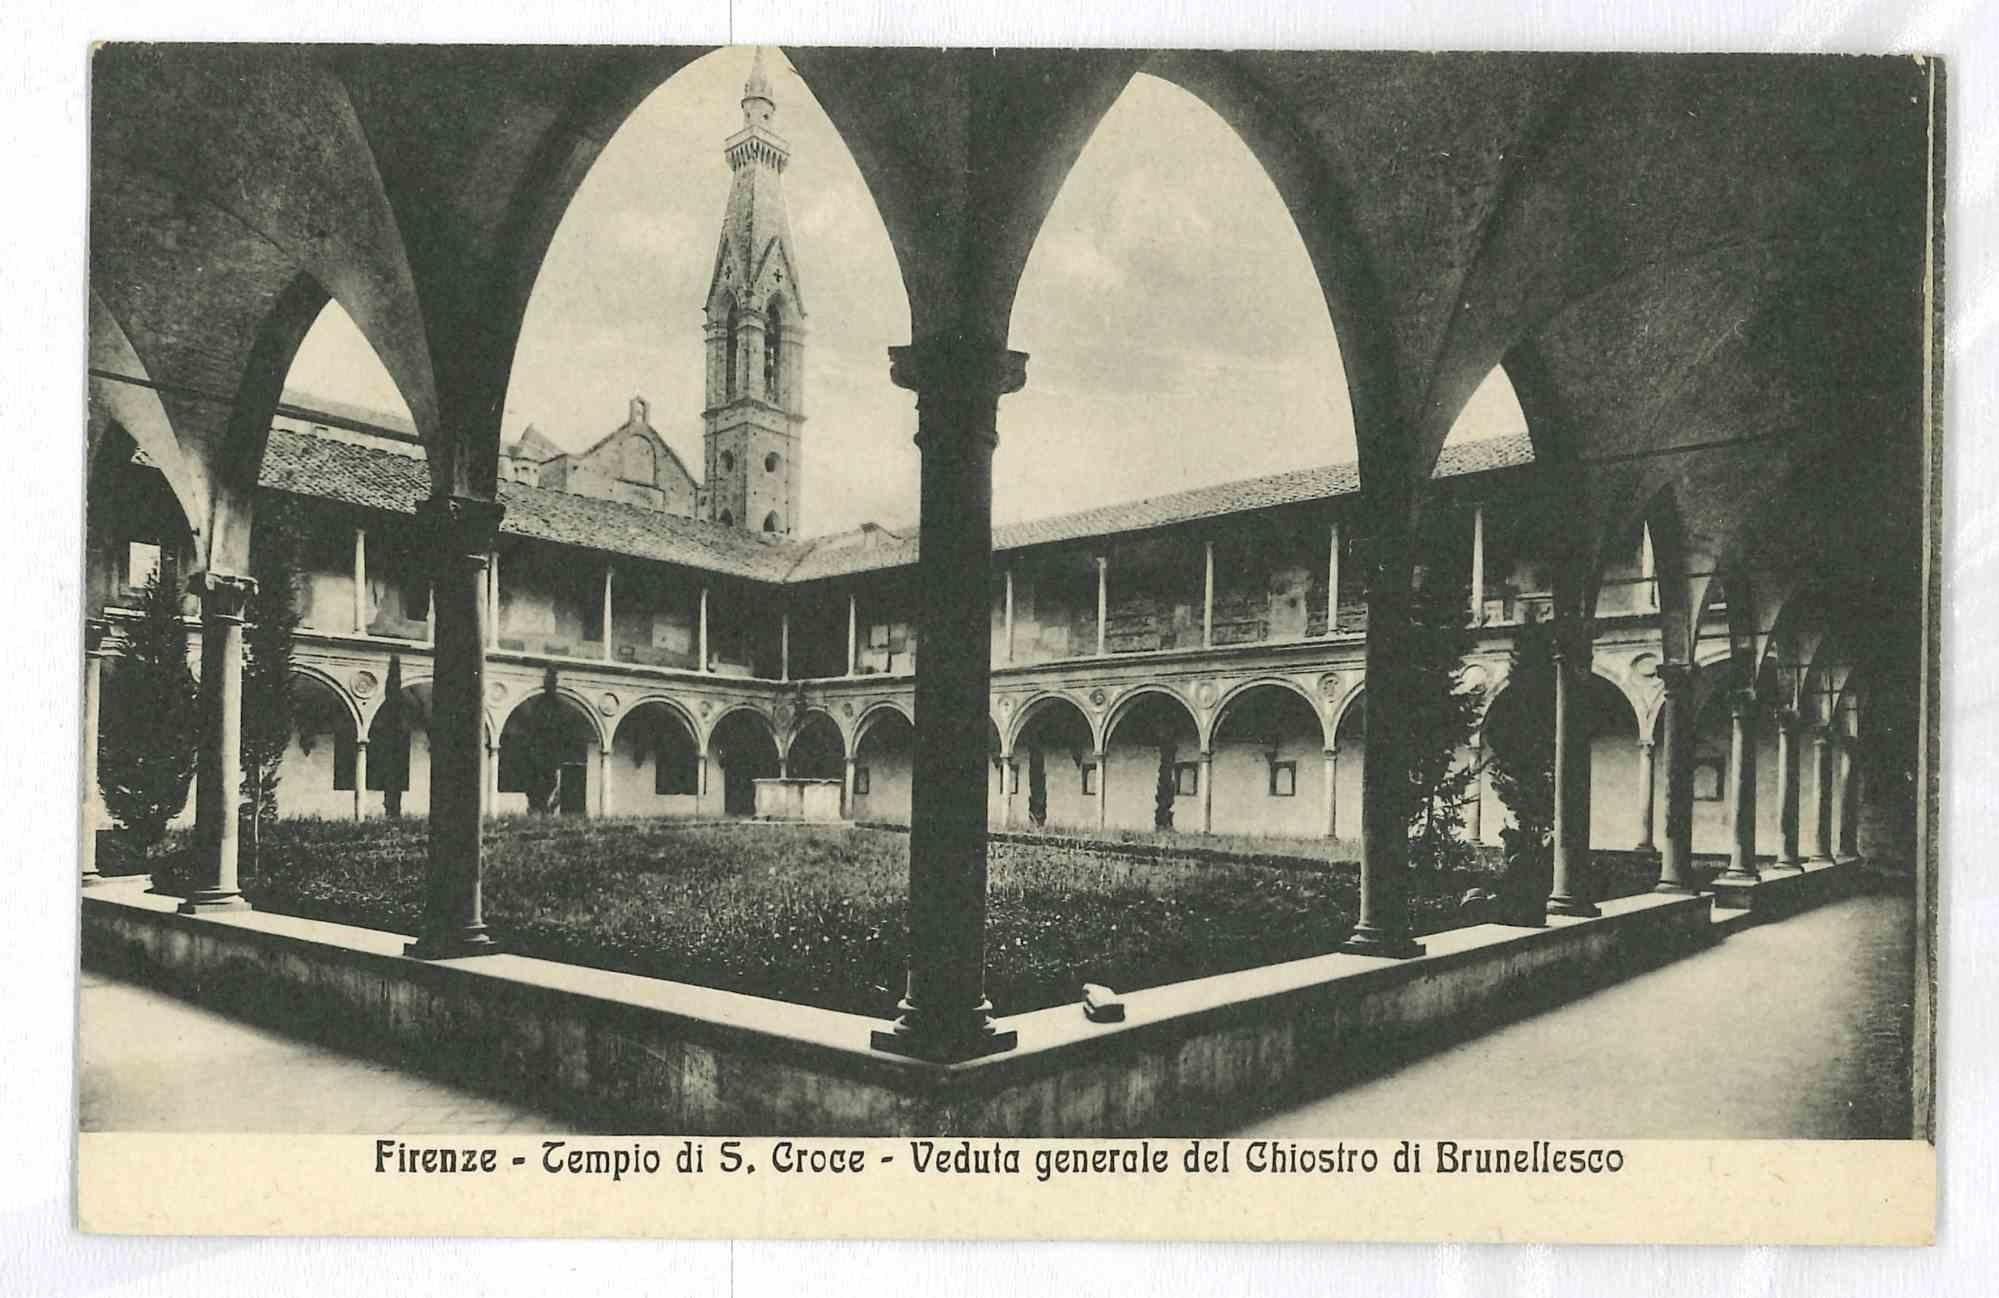 Unknown Portrait Photograph - Photo of Temple of S.Croce - Florence - Mid-20th Century